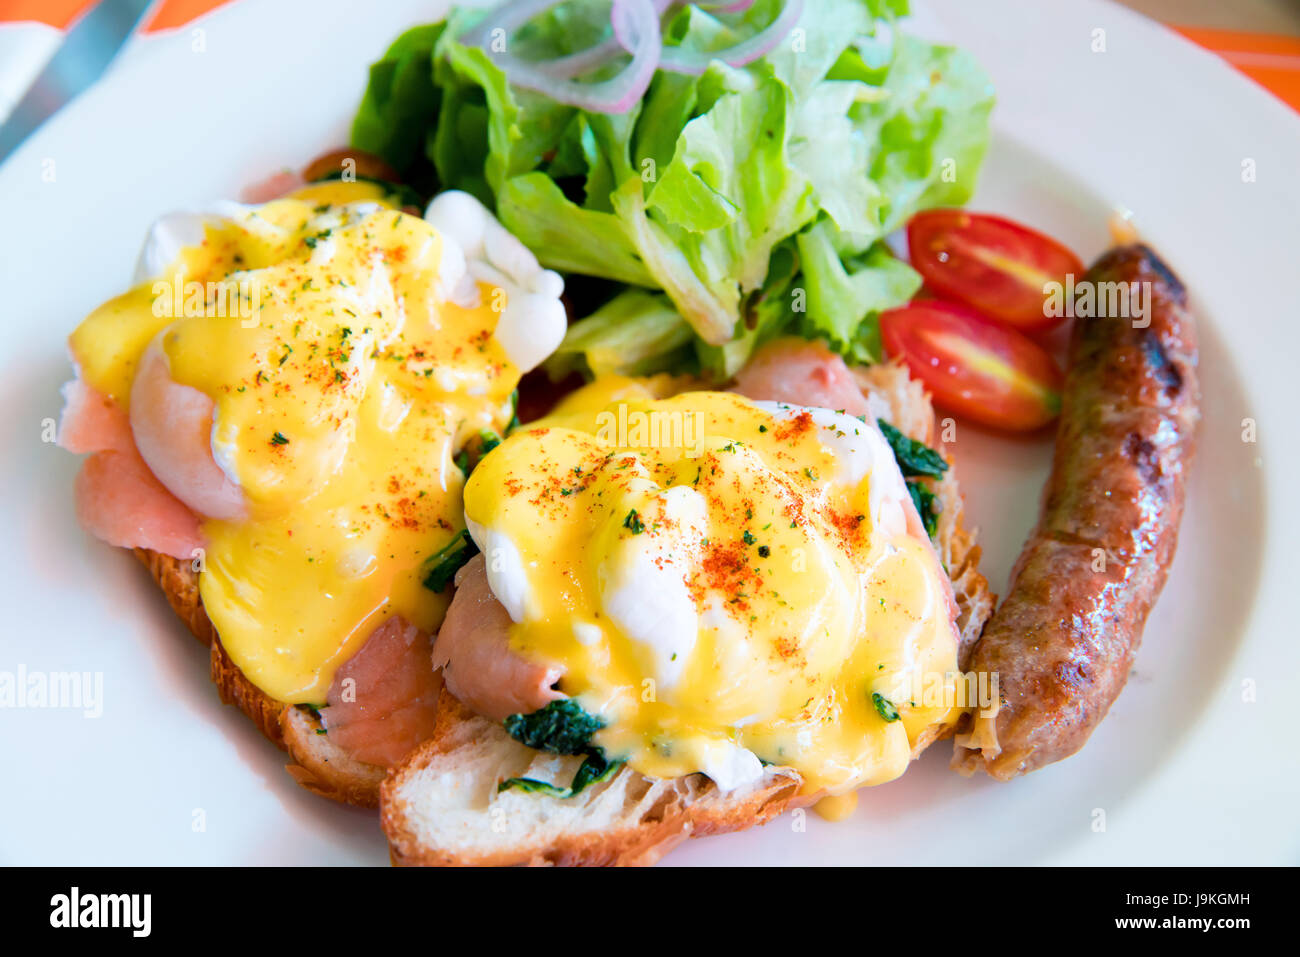 Egg benedict with smoked salmon, sauce, green salad vegetable and grill hot dog Stock Photo